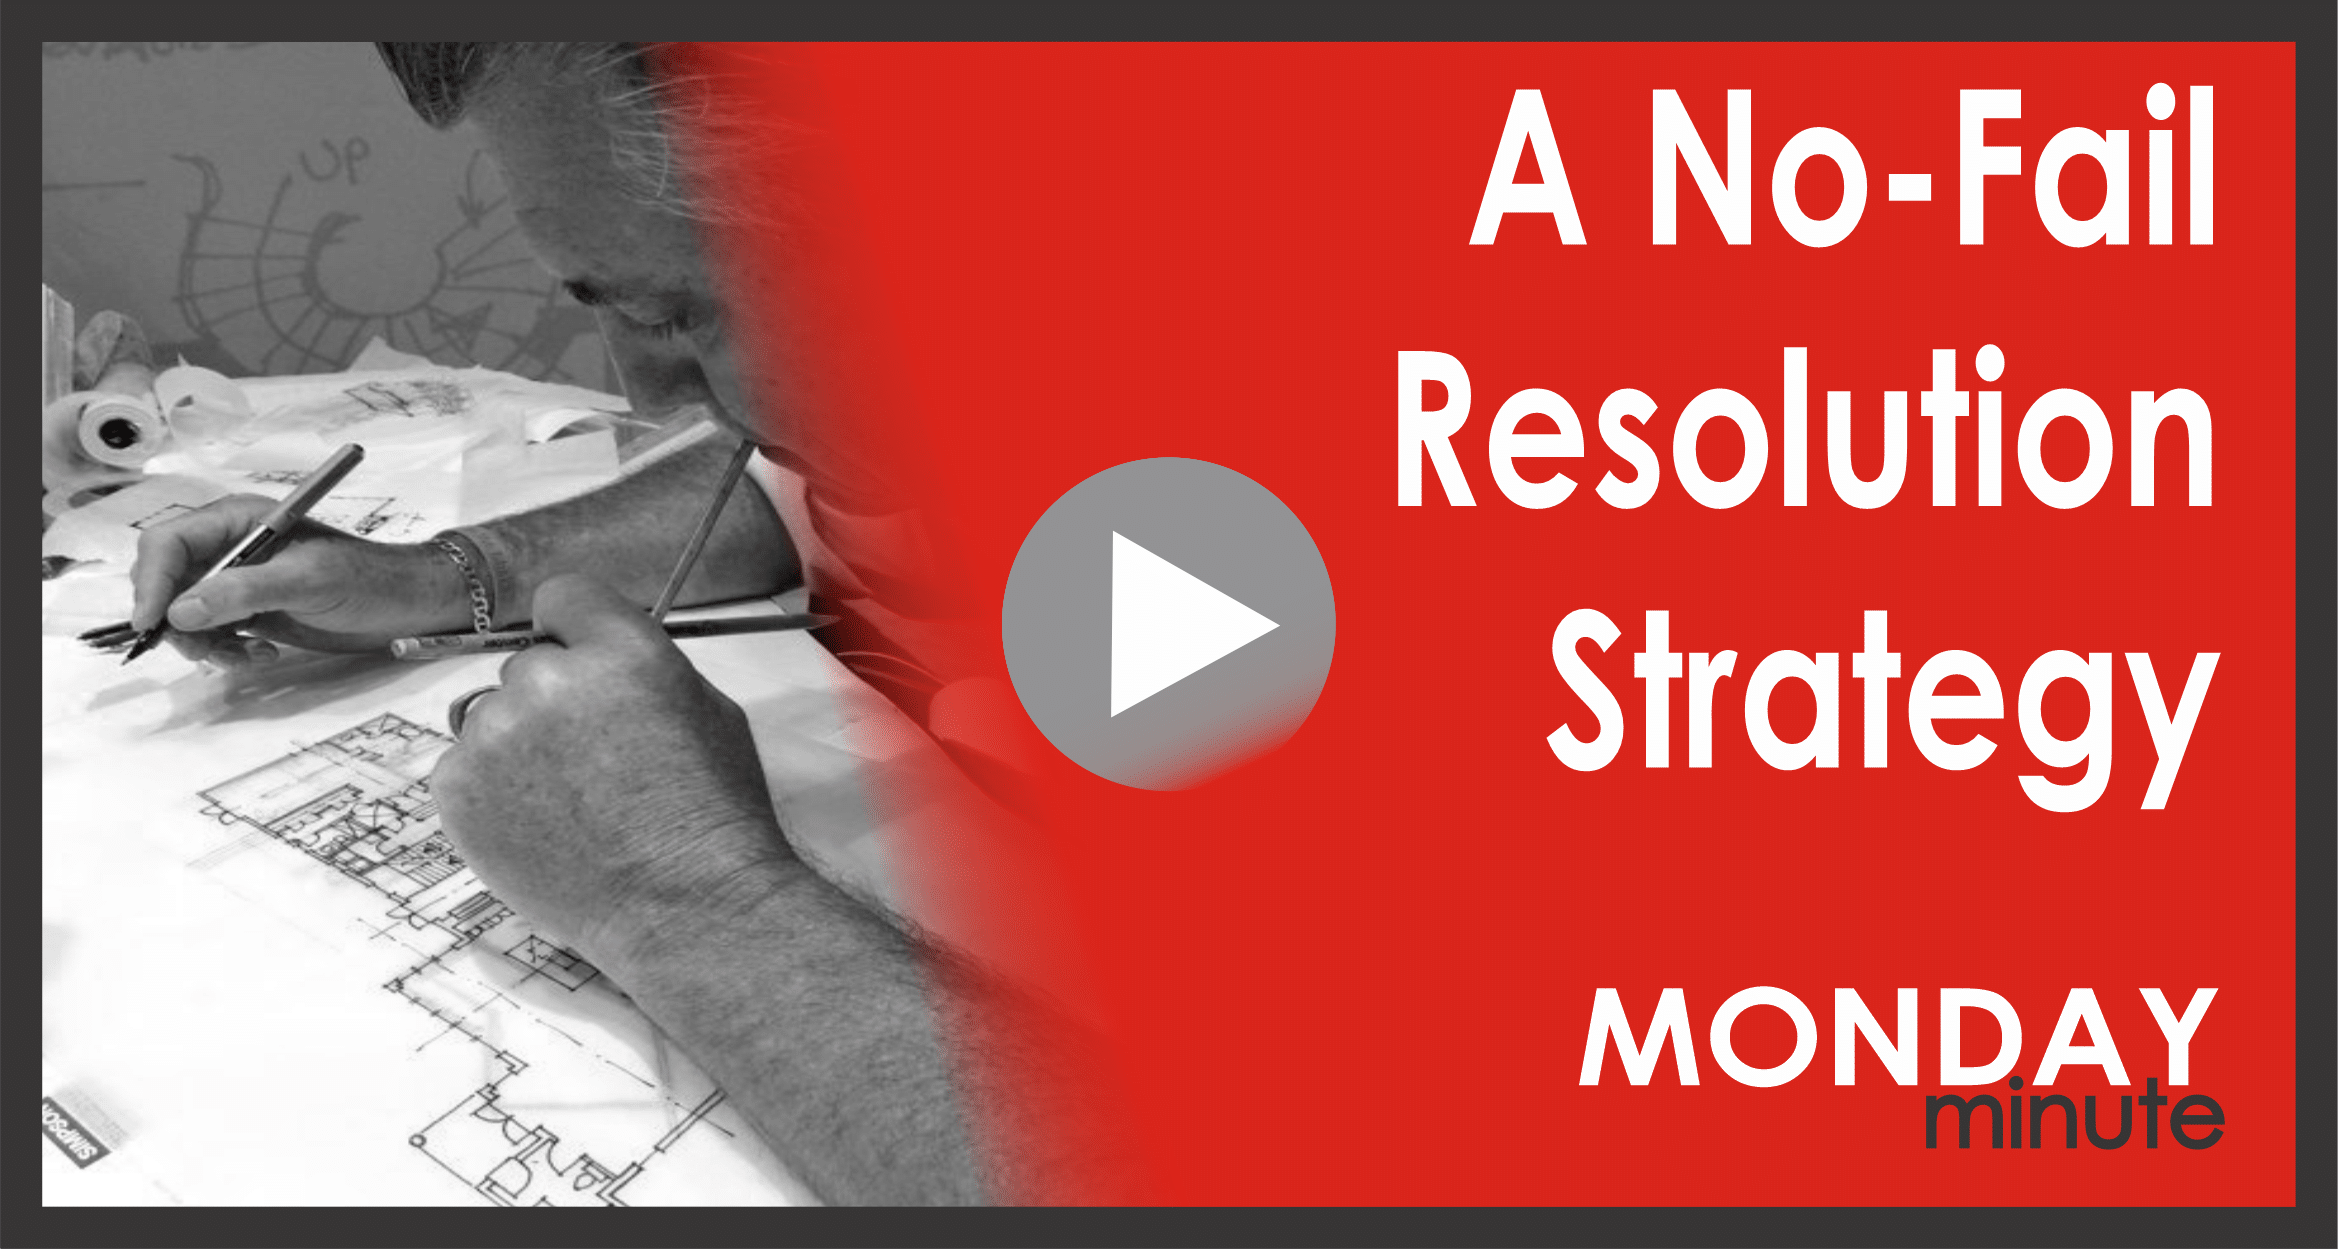 A No-Fail Resolution Strategy. Monday Minute.